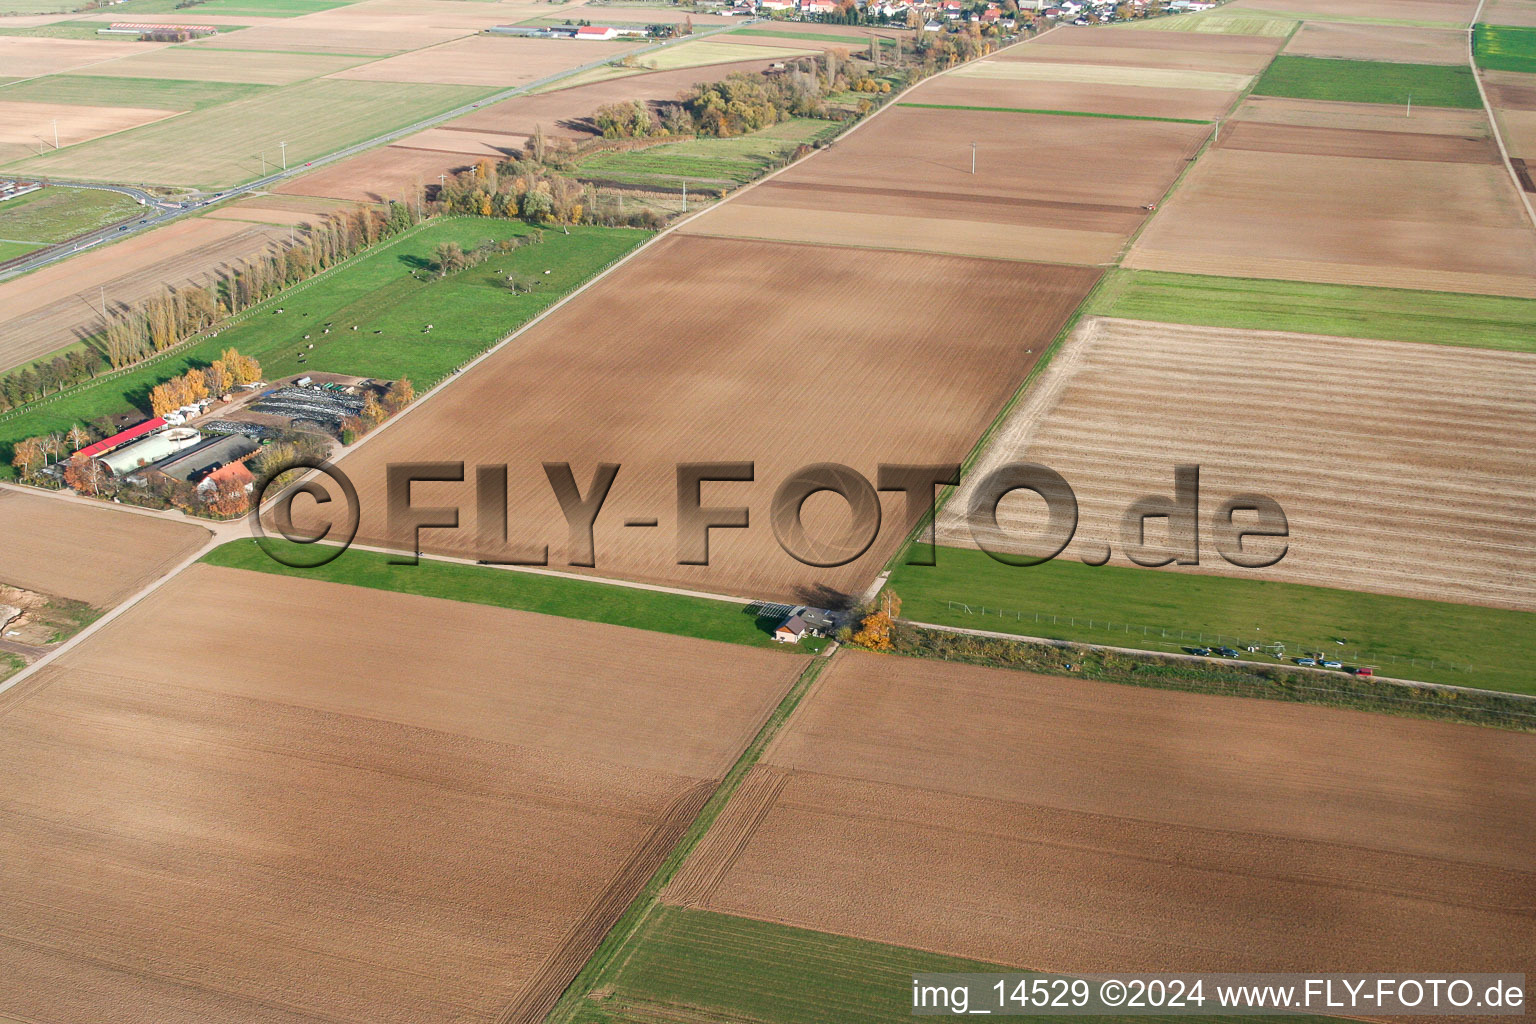 Aerial photograpy of Model airfield in Offenbach an der Queich in the state Rhineland-Palatinate, Germany